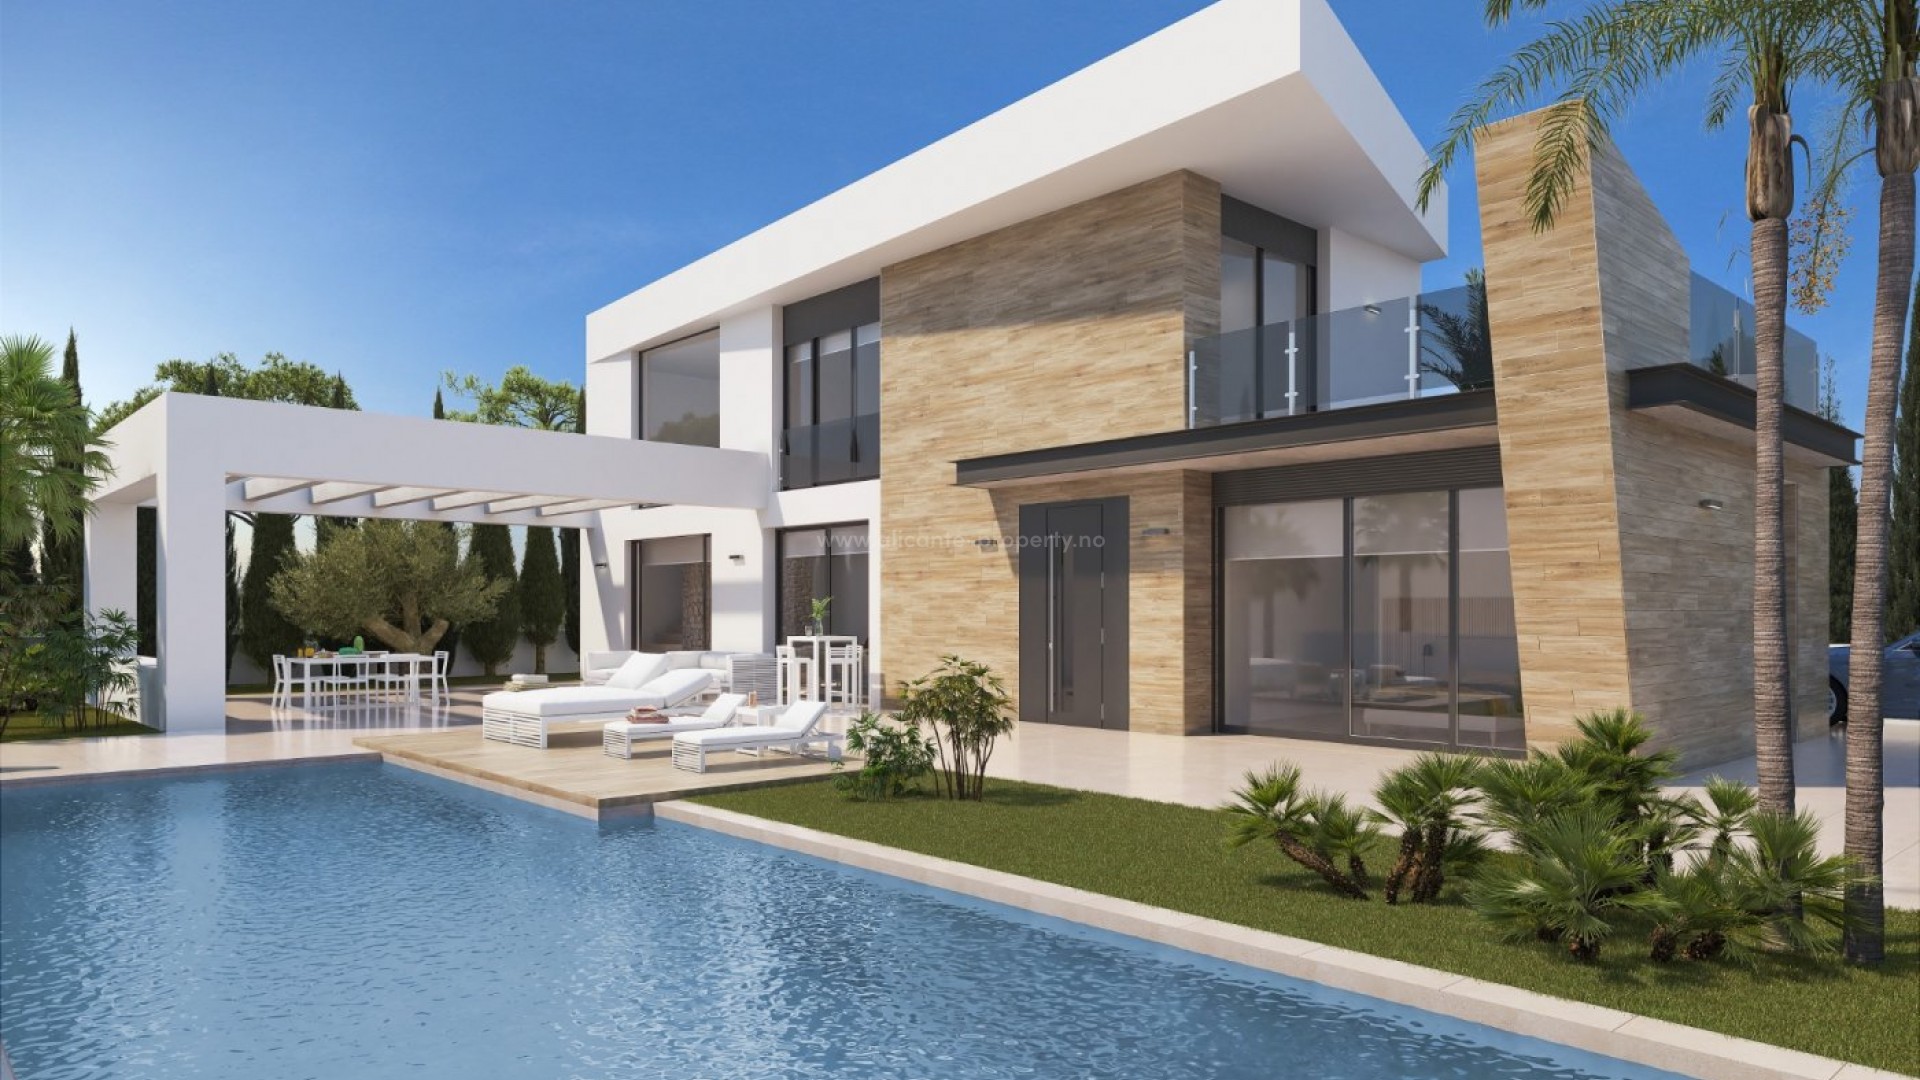 Unique independent custom villas in Ciudad Quesada, 3 bedrooms, 3 bathrooms. The three models of villa can be adapted to the smallest detail, private pool